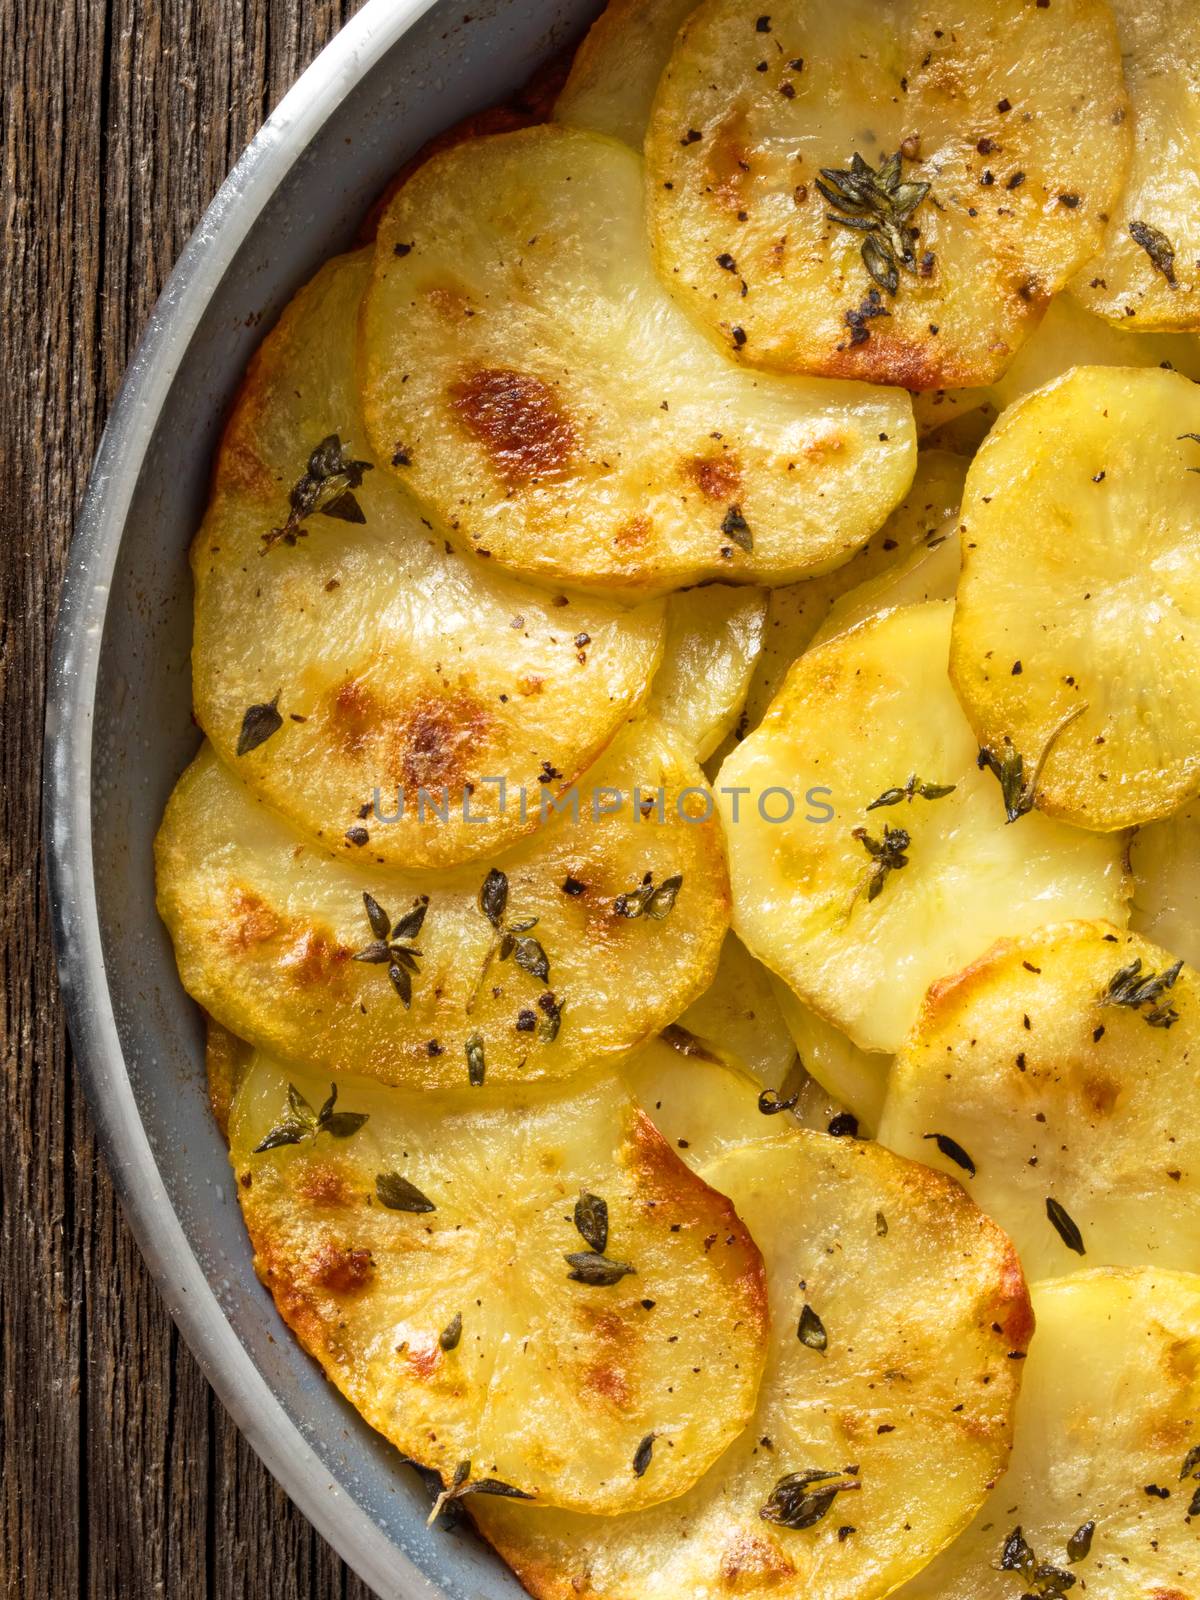 rustic french golden anna potato by zkruger